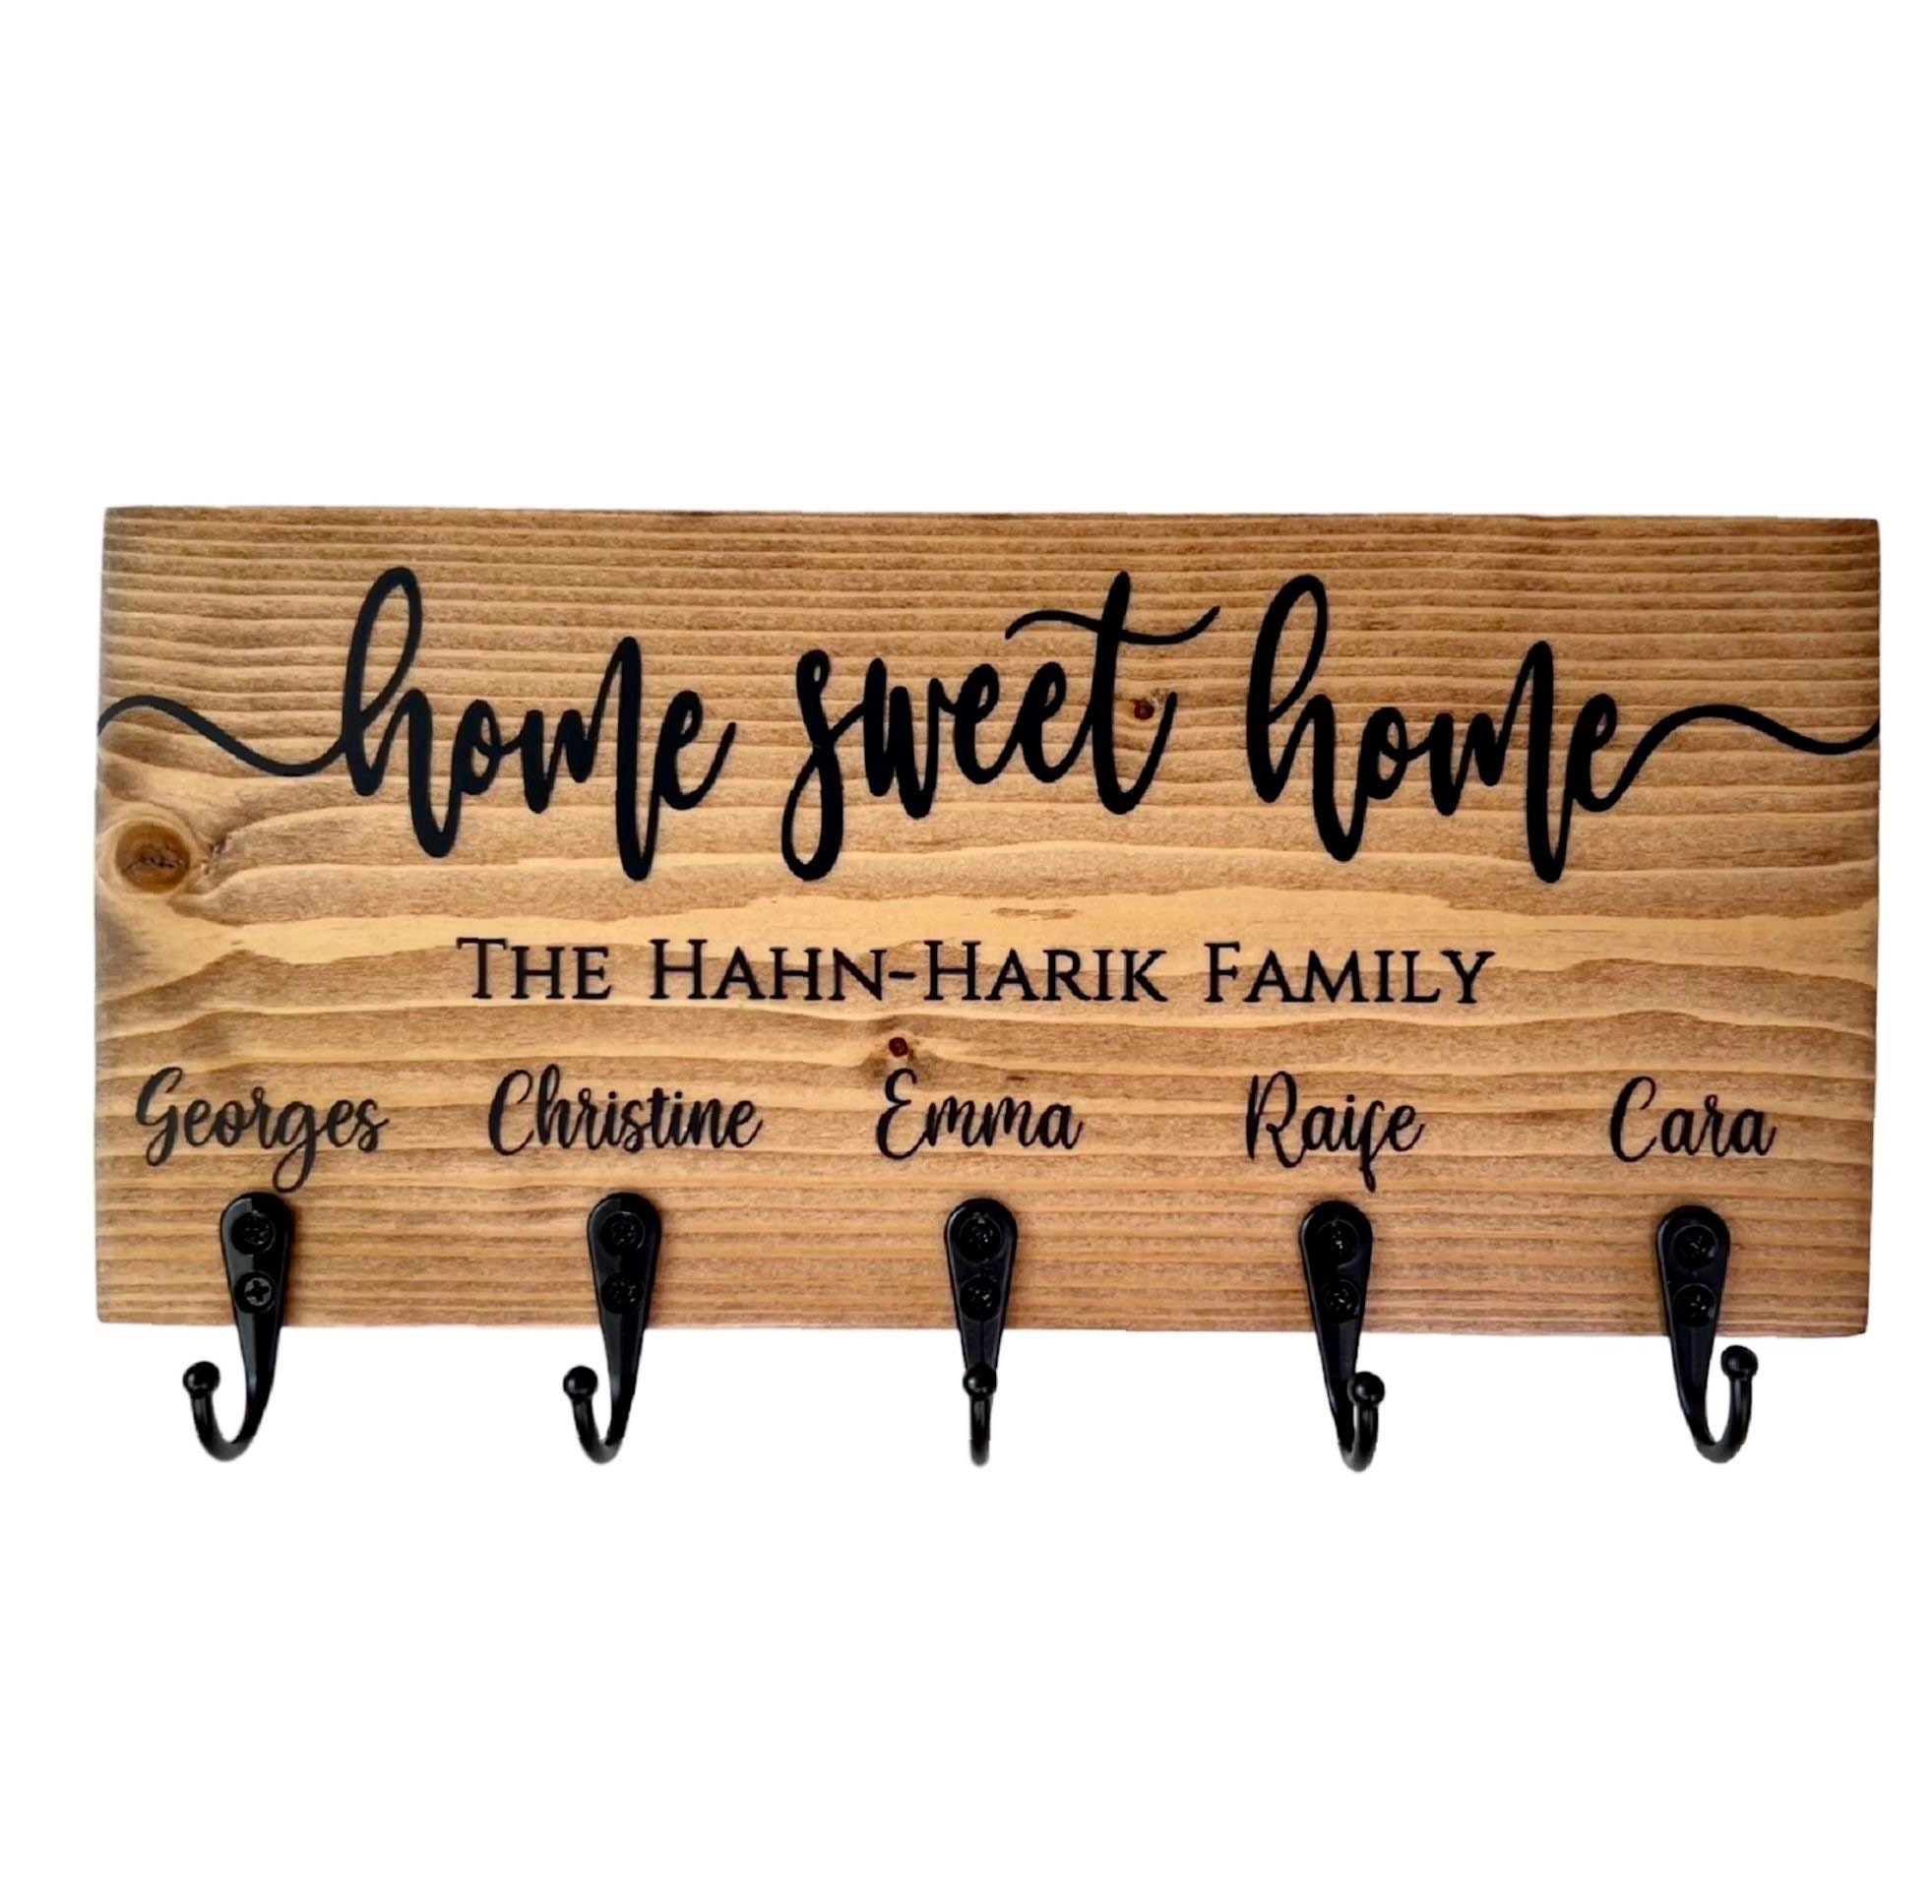 Home Sweet Home Personalized Key Ring Holder for Wall Key 